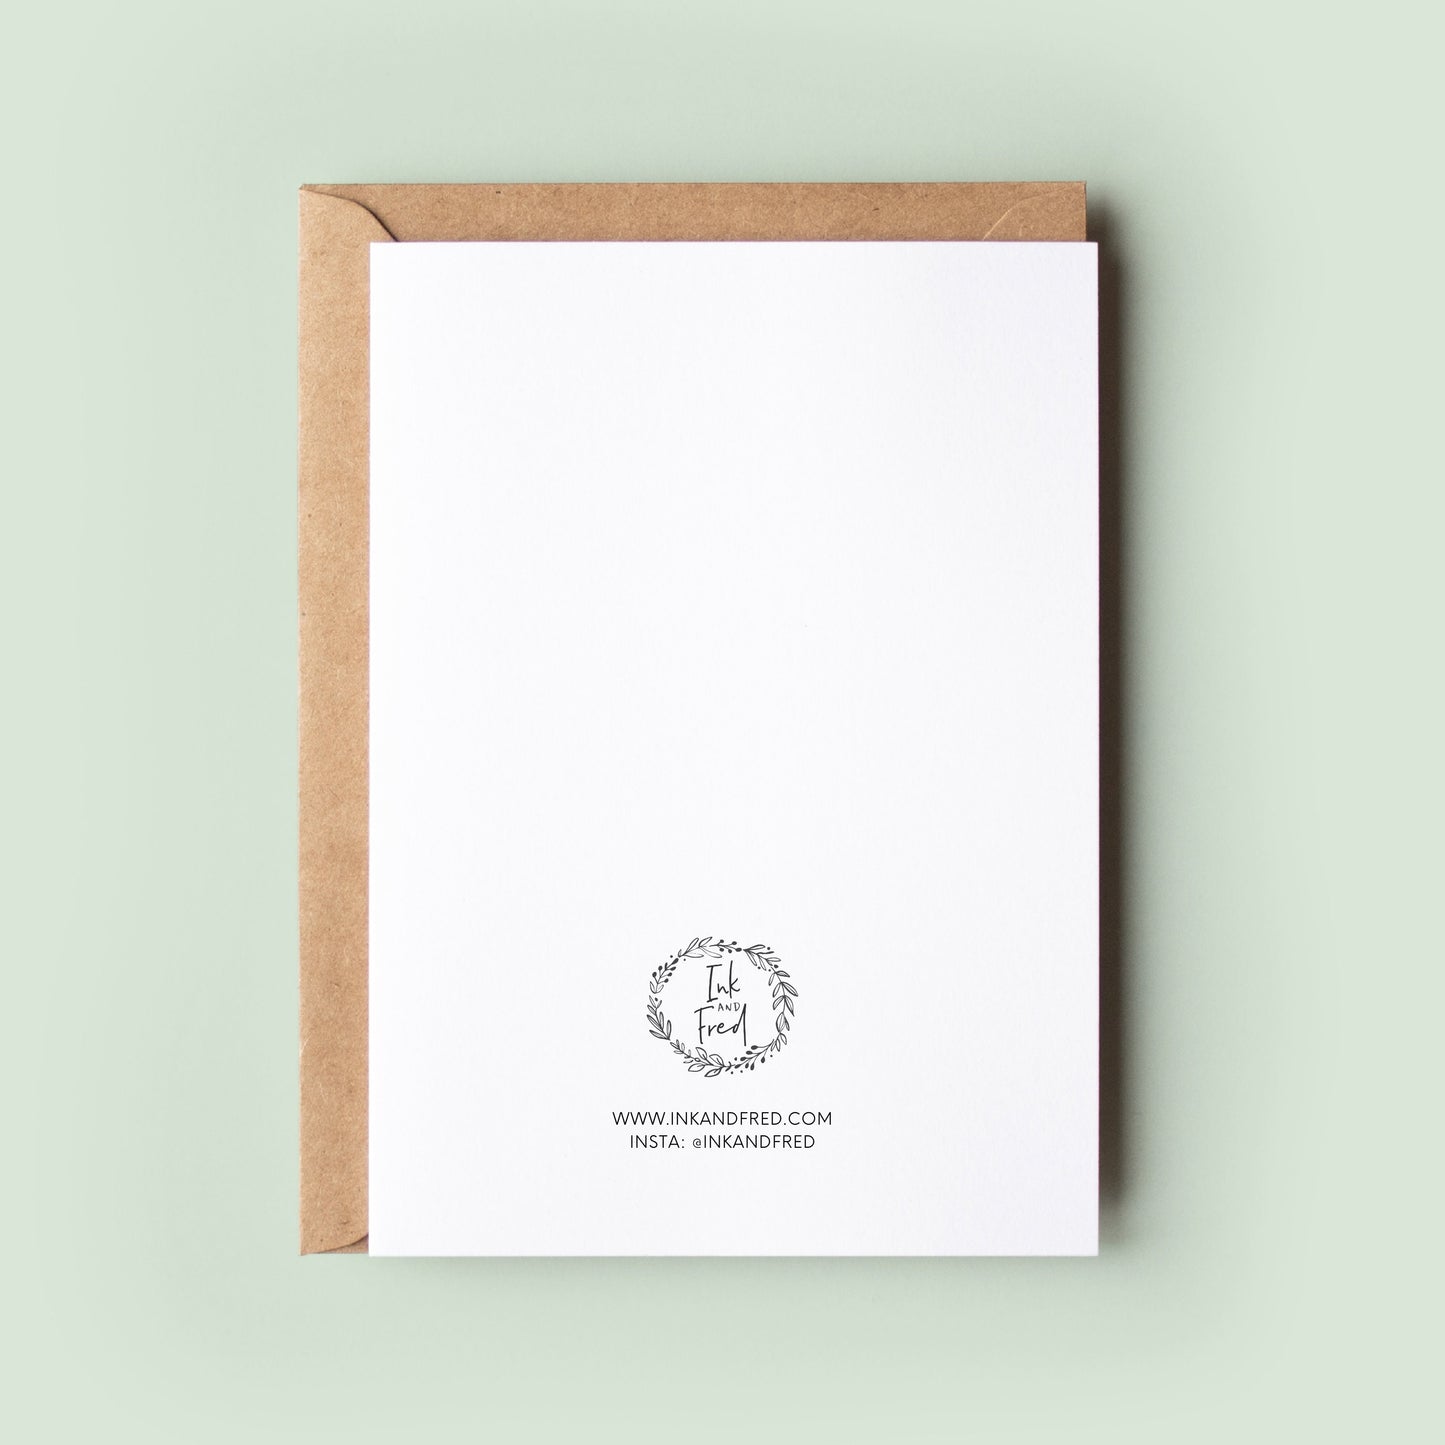 Congratulations on Being Awarded an OBE Personalised Greeting Card, OBE Card, OBE Card, Damehood, Knighthood Honours List Card - #415